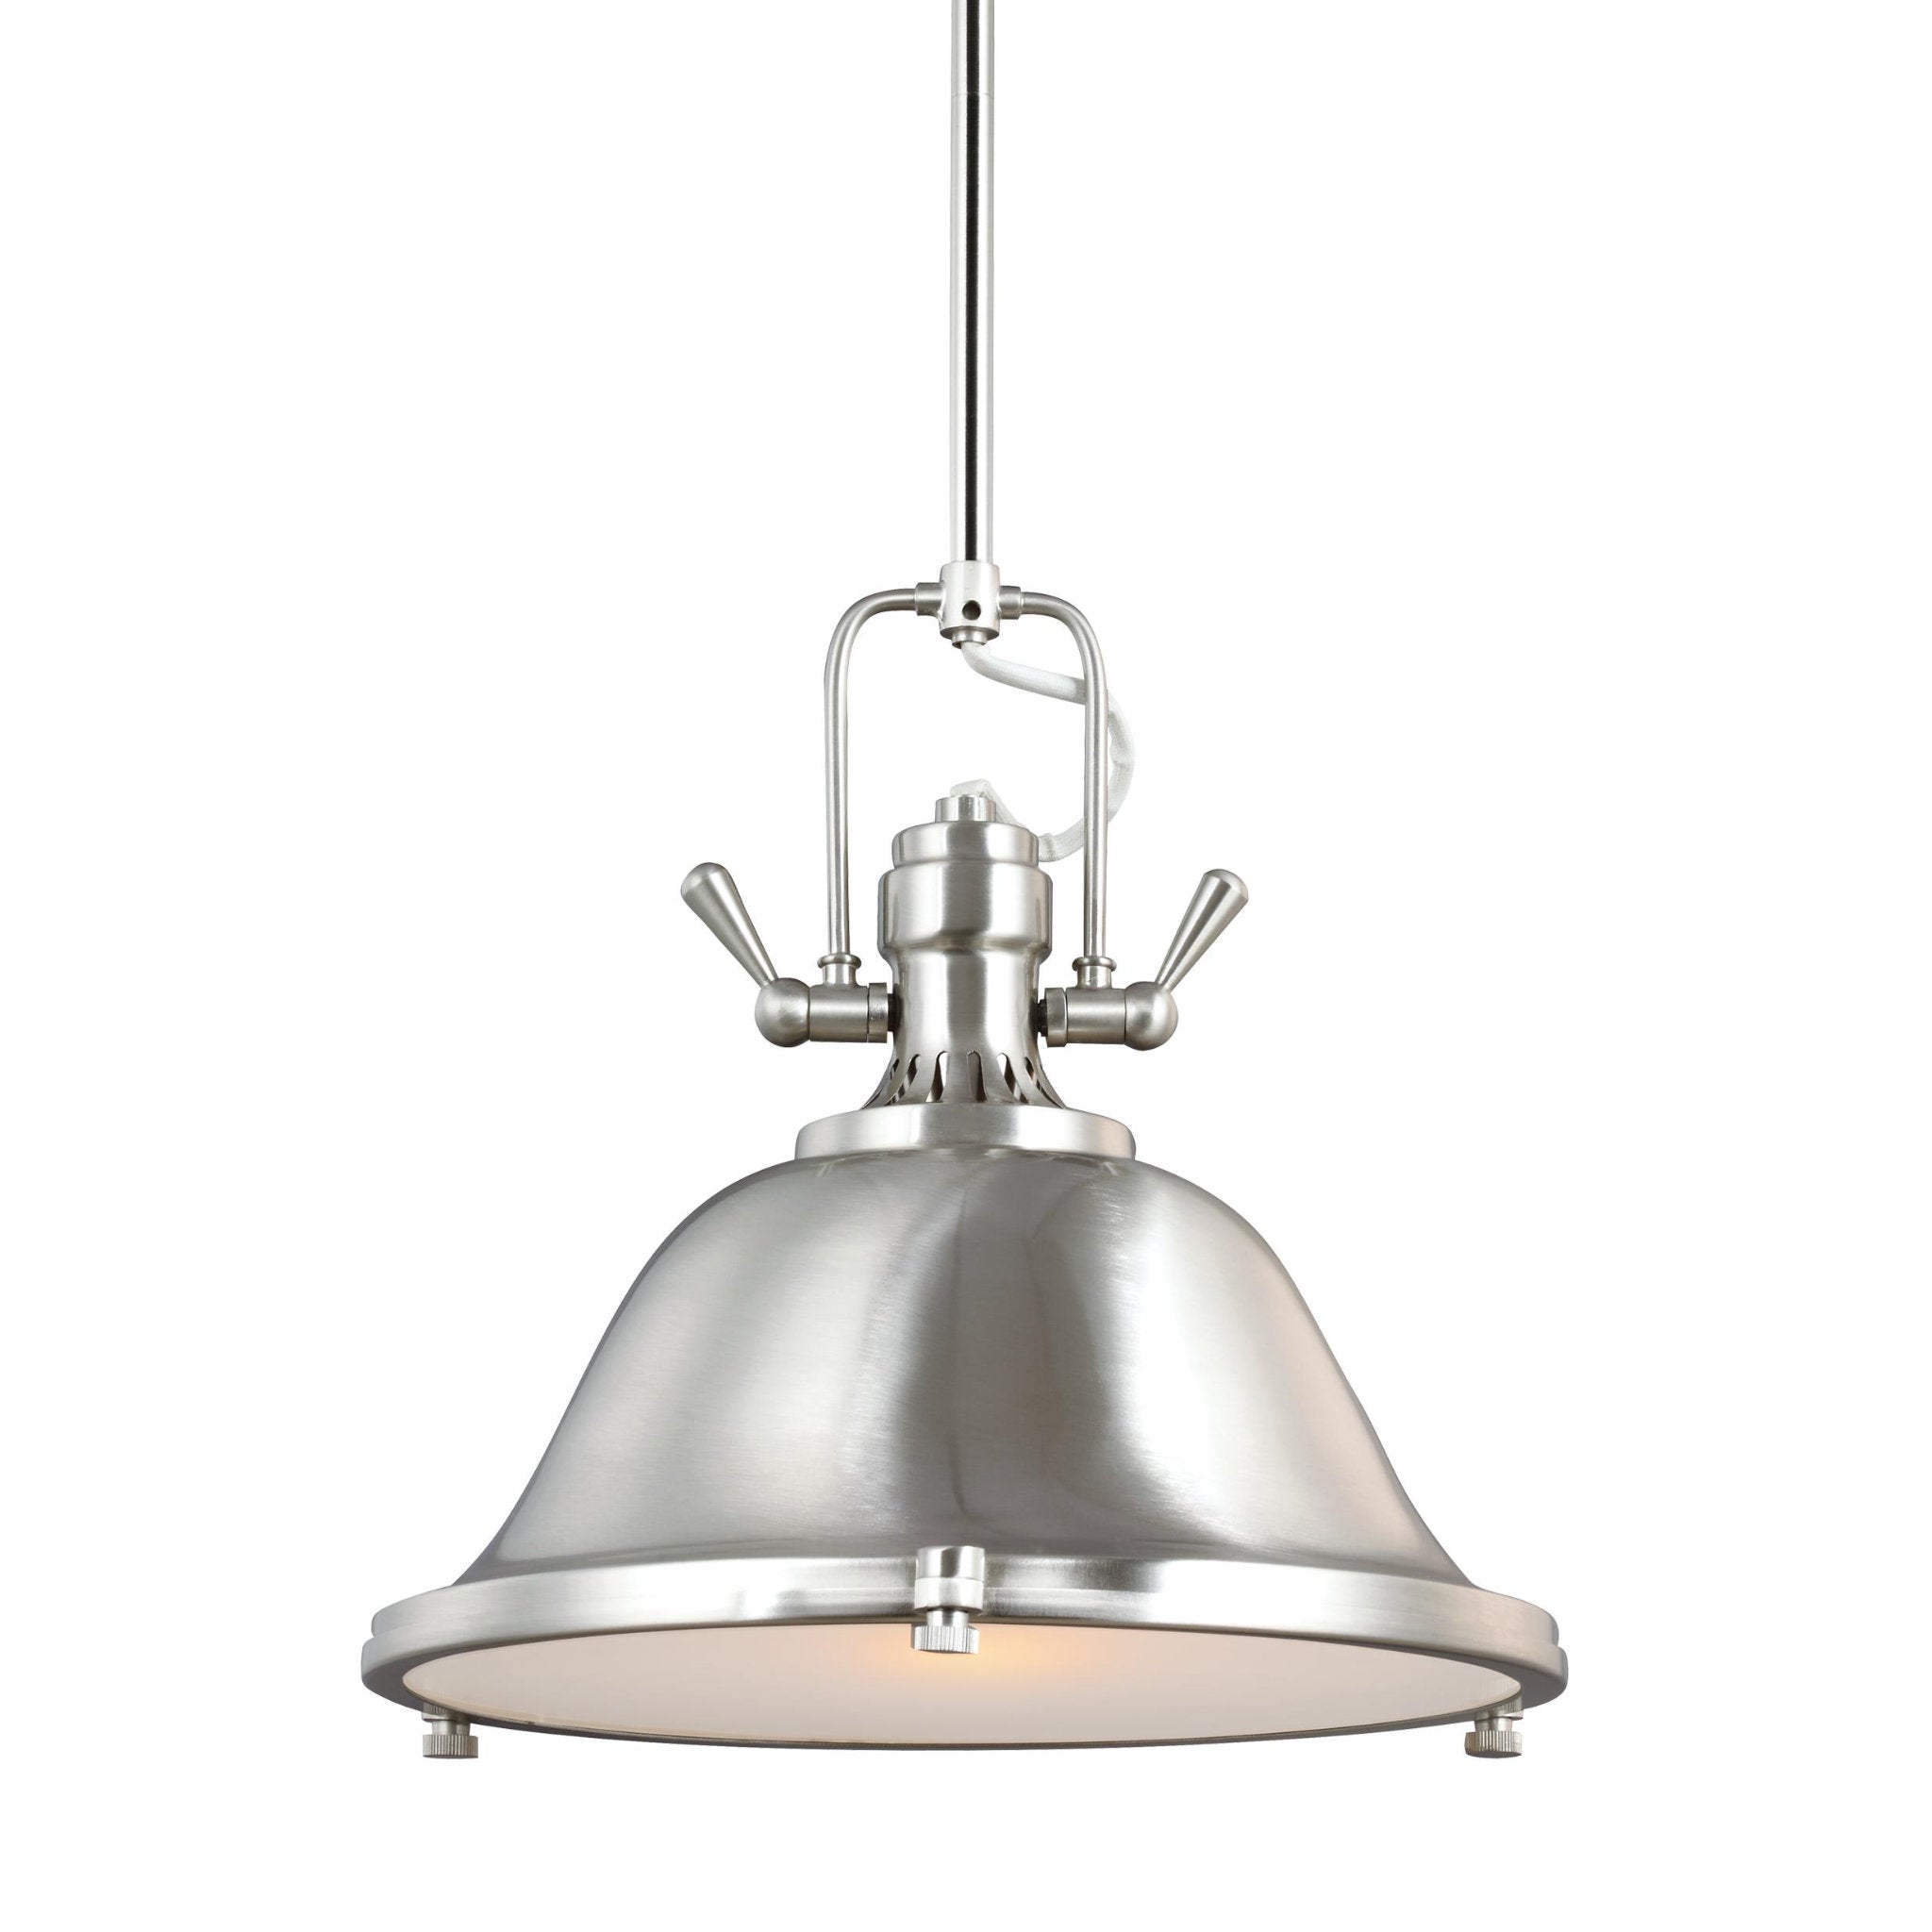 Stone Street One Light Pendant Contemporary 12" Height Steel Round Satin Etched Shade in Brushed Nickel